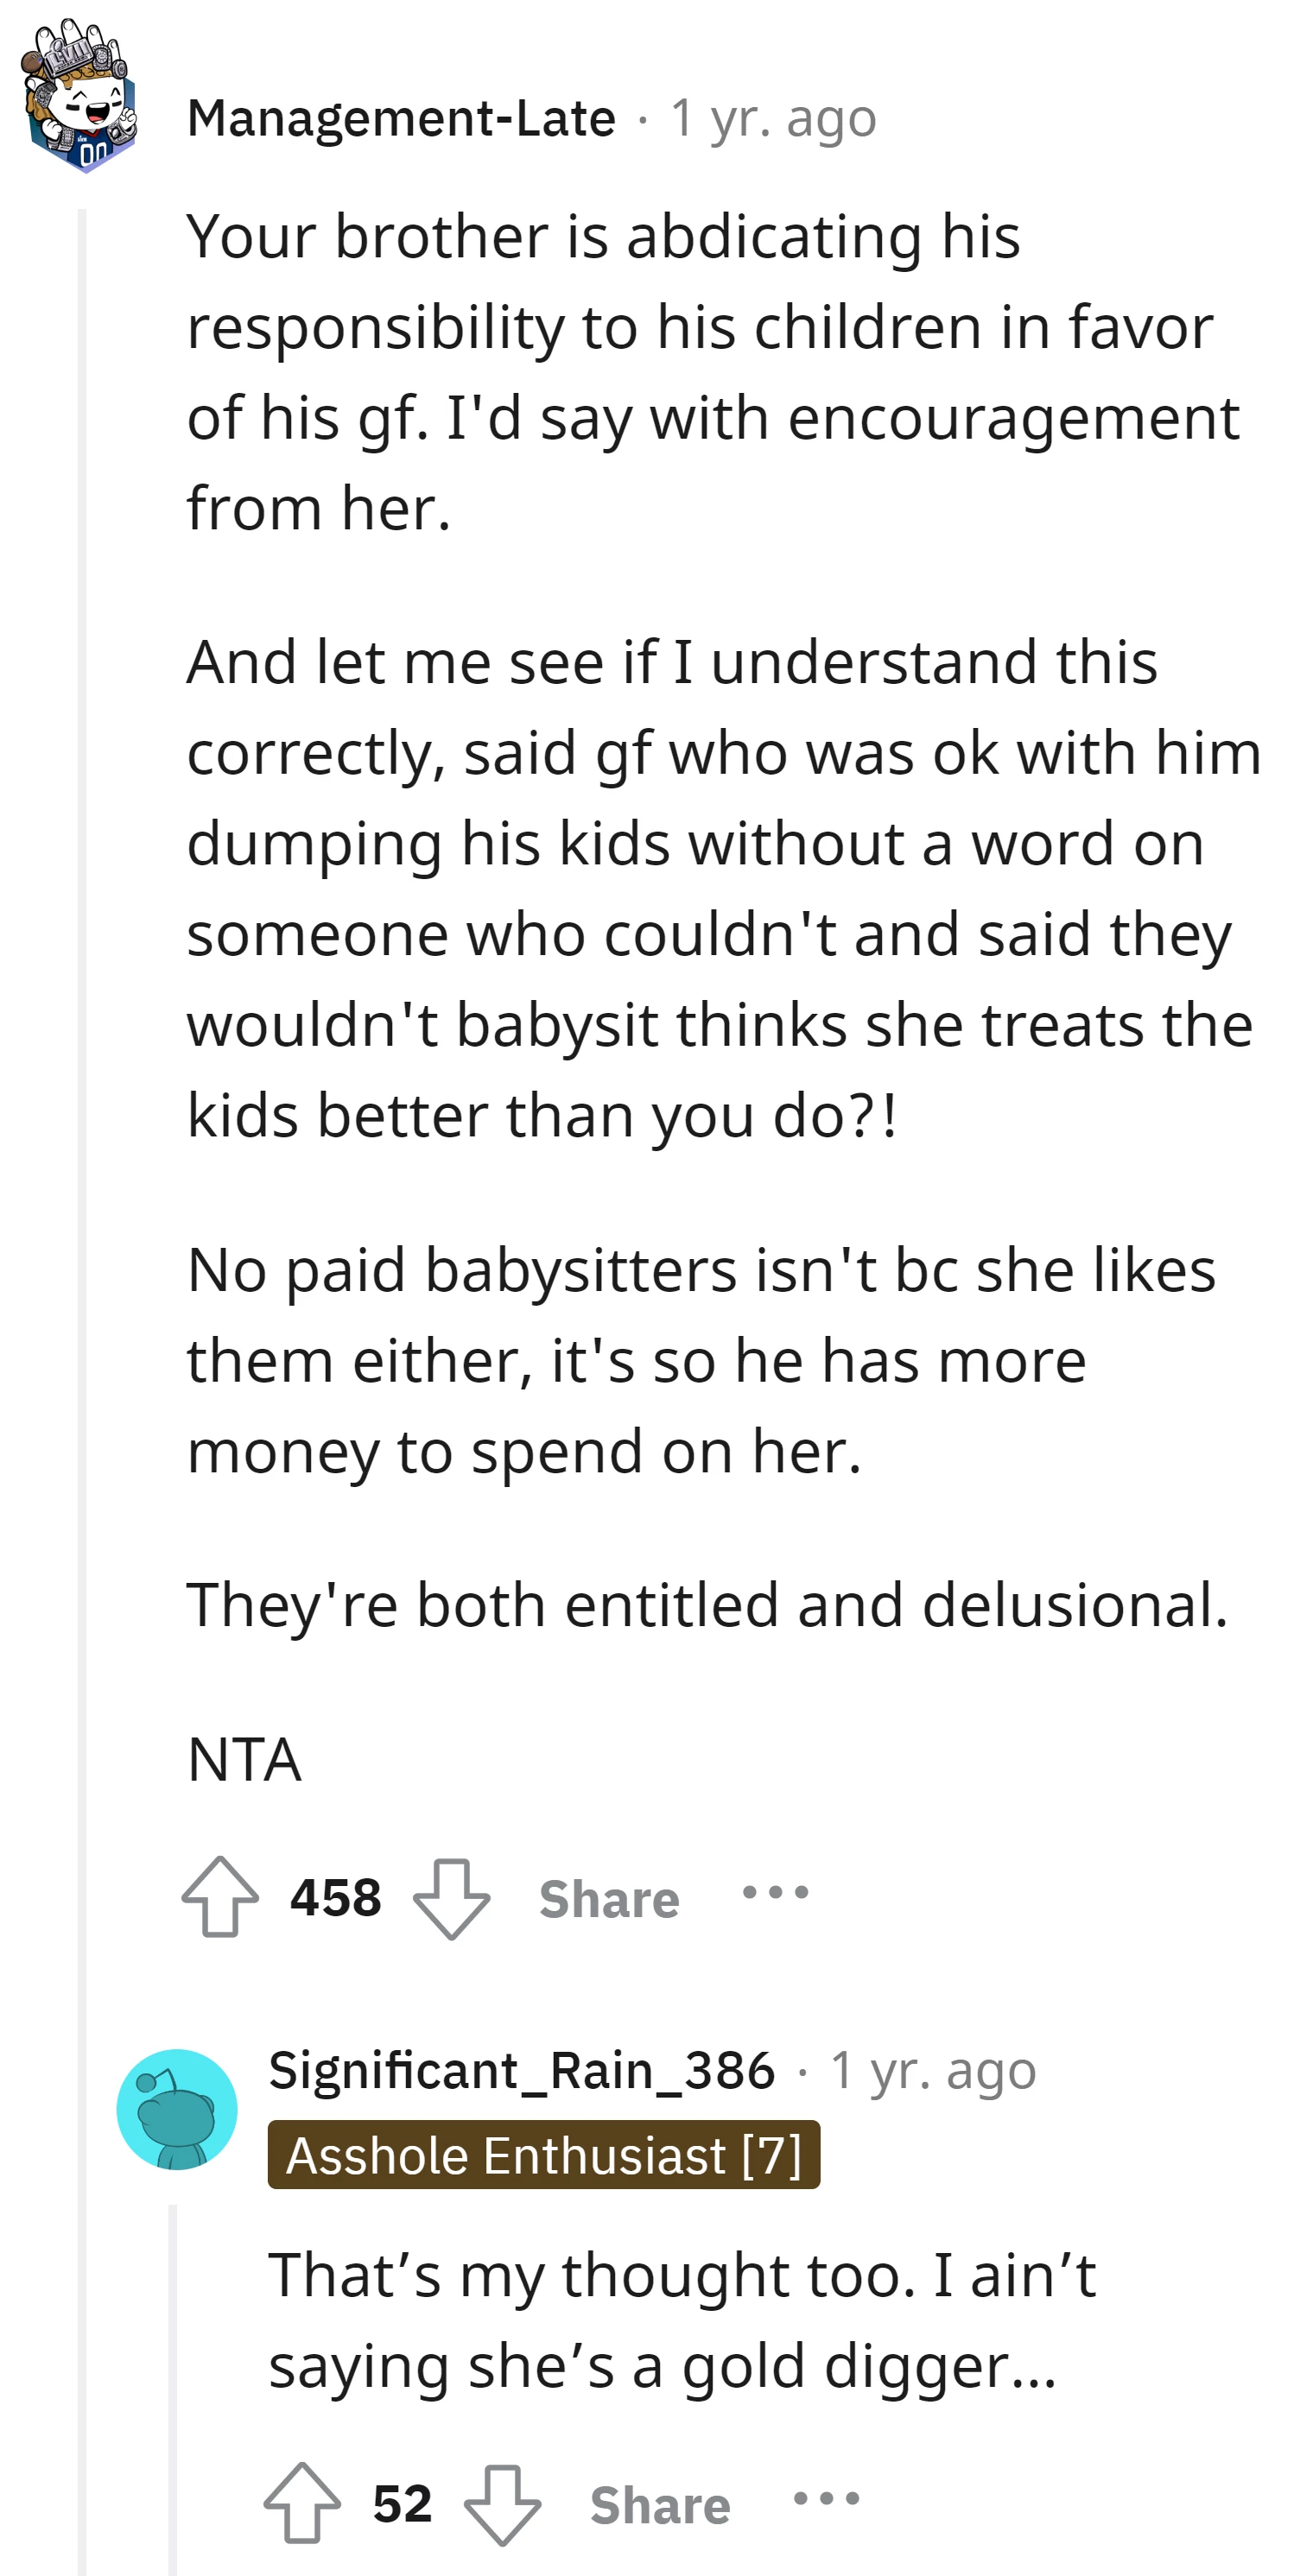 The absence of paid babysitters is more about financial priorities than genuine care